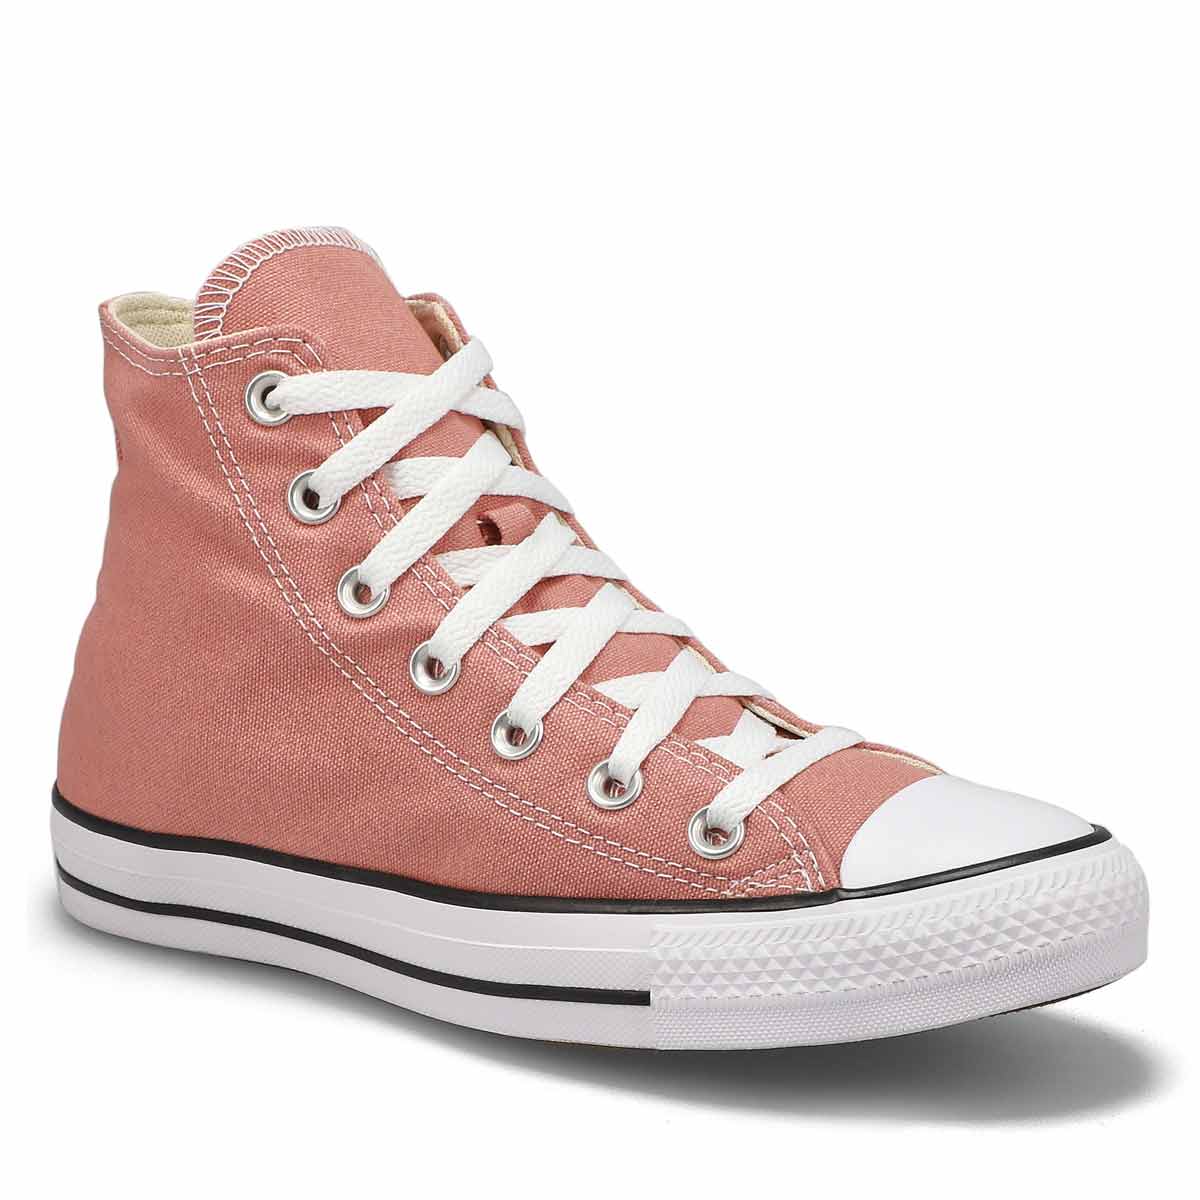 Converse Women's CT All Star Hi Sneaker- Cany 